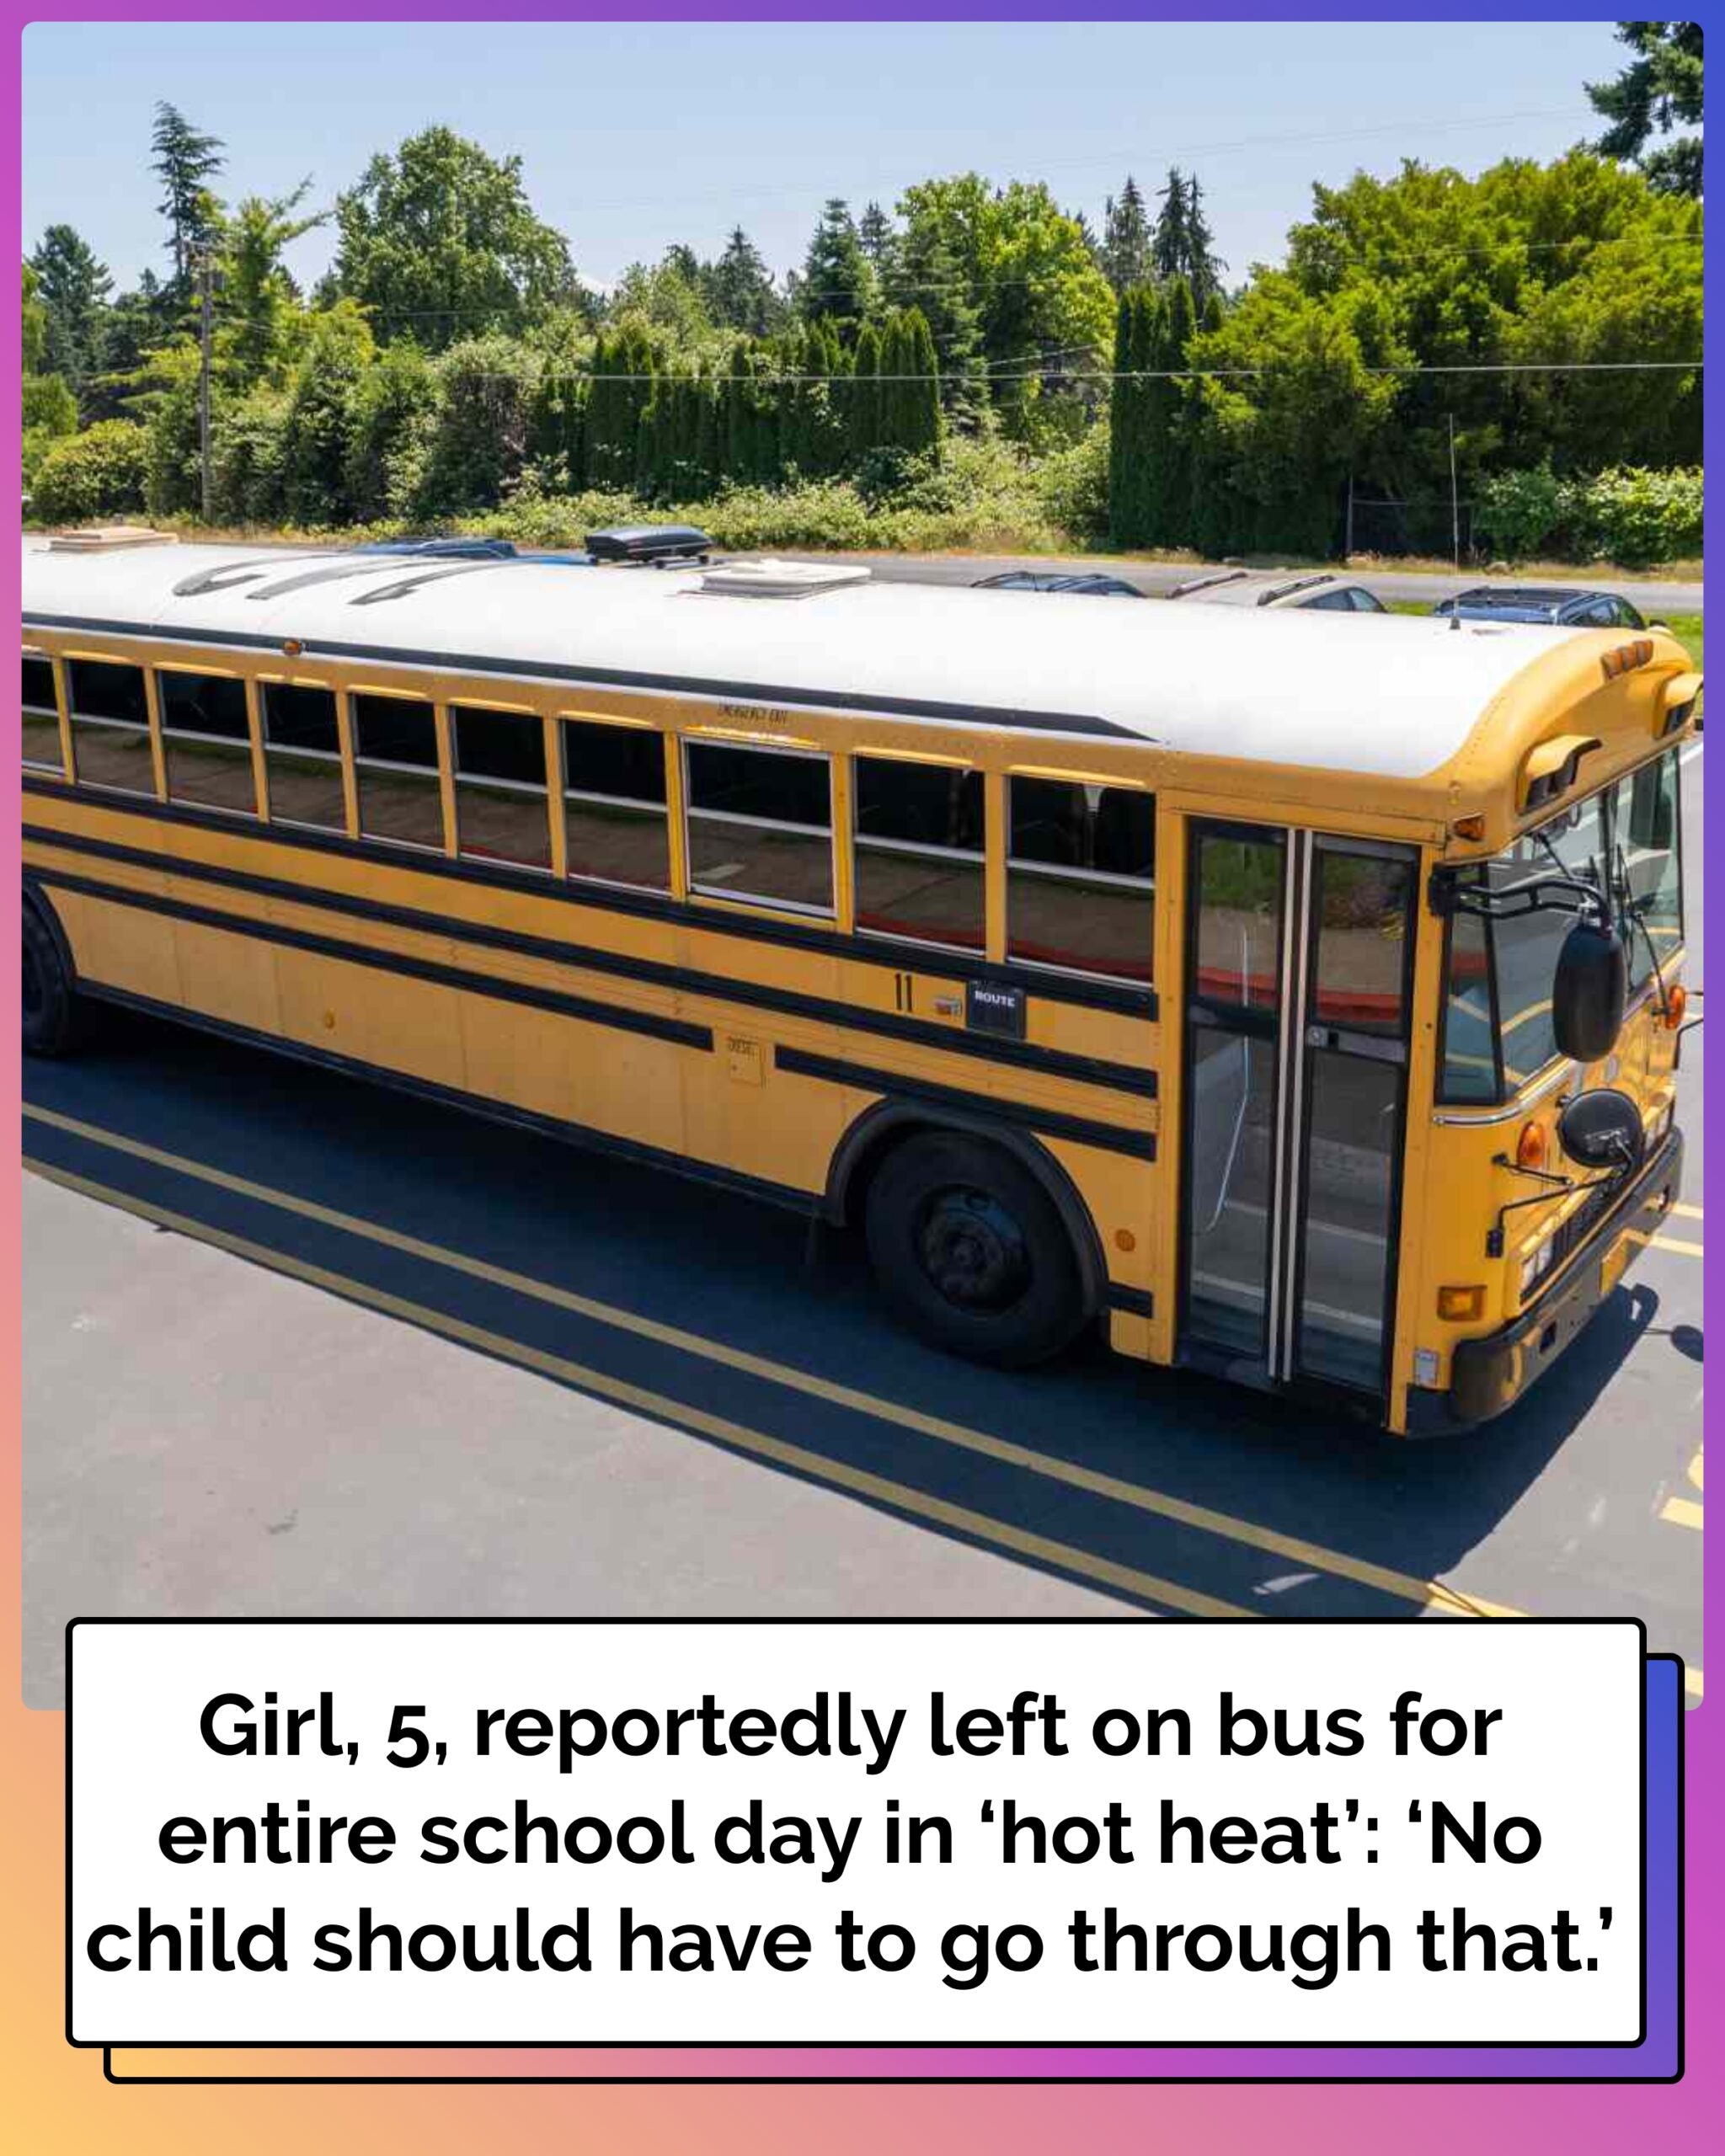 Girl, 5, Reportedly Left on Bus for Entire School Day in ‘Hot Heat’: ‘No Child Should Have to Go Through That’